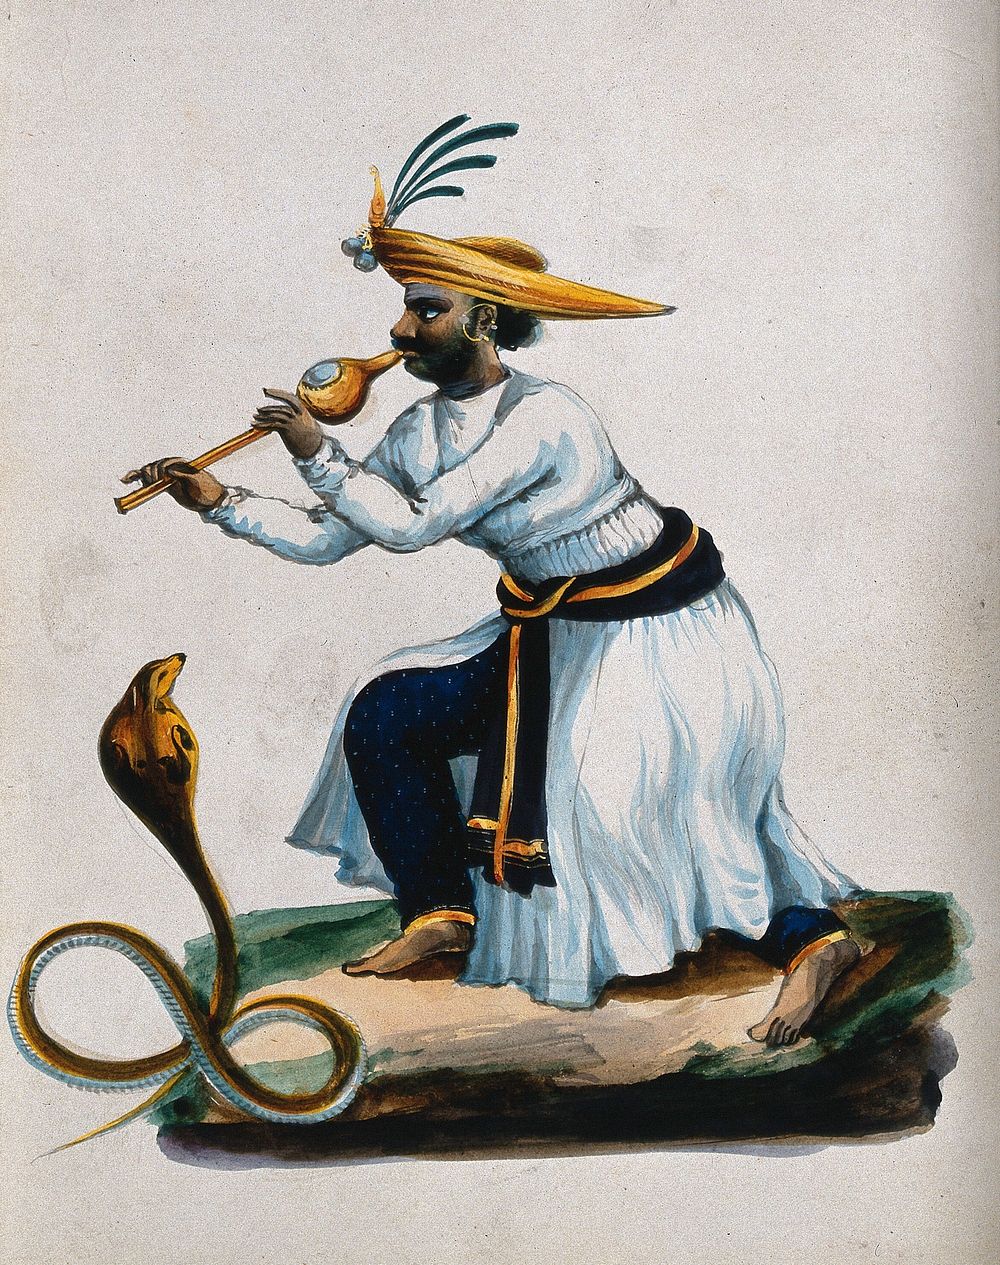 An Indian snake charmer. Gouache painting by an Indian painter.